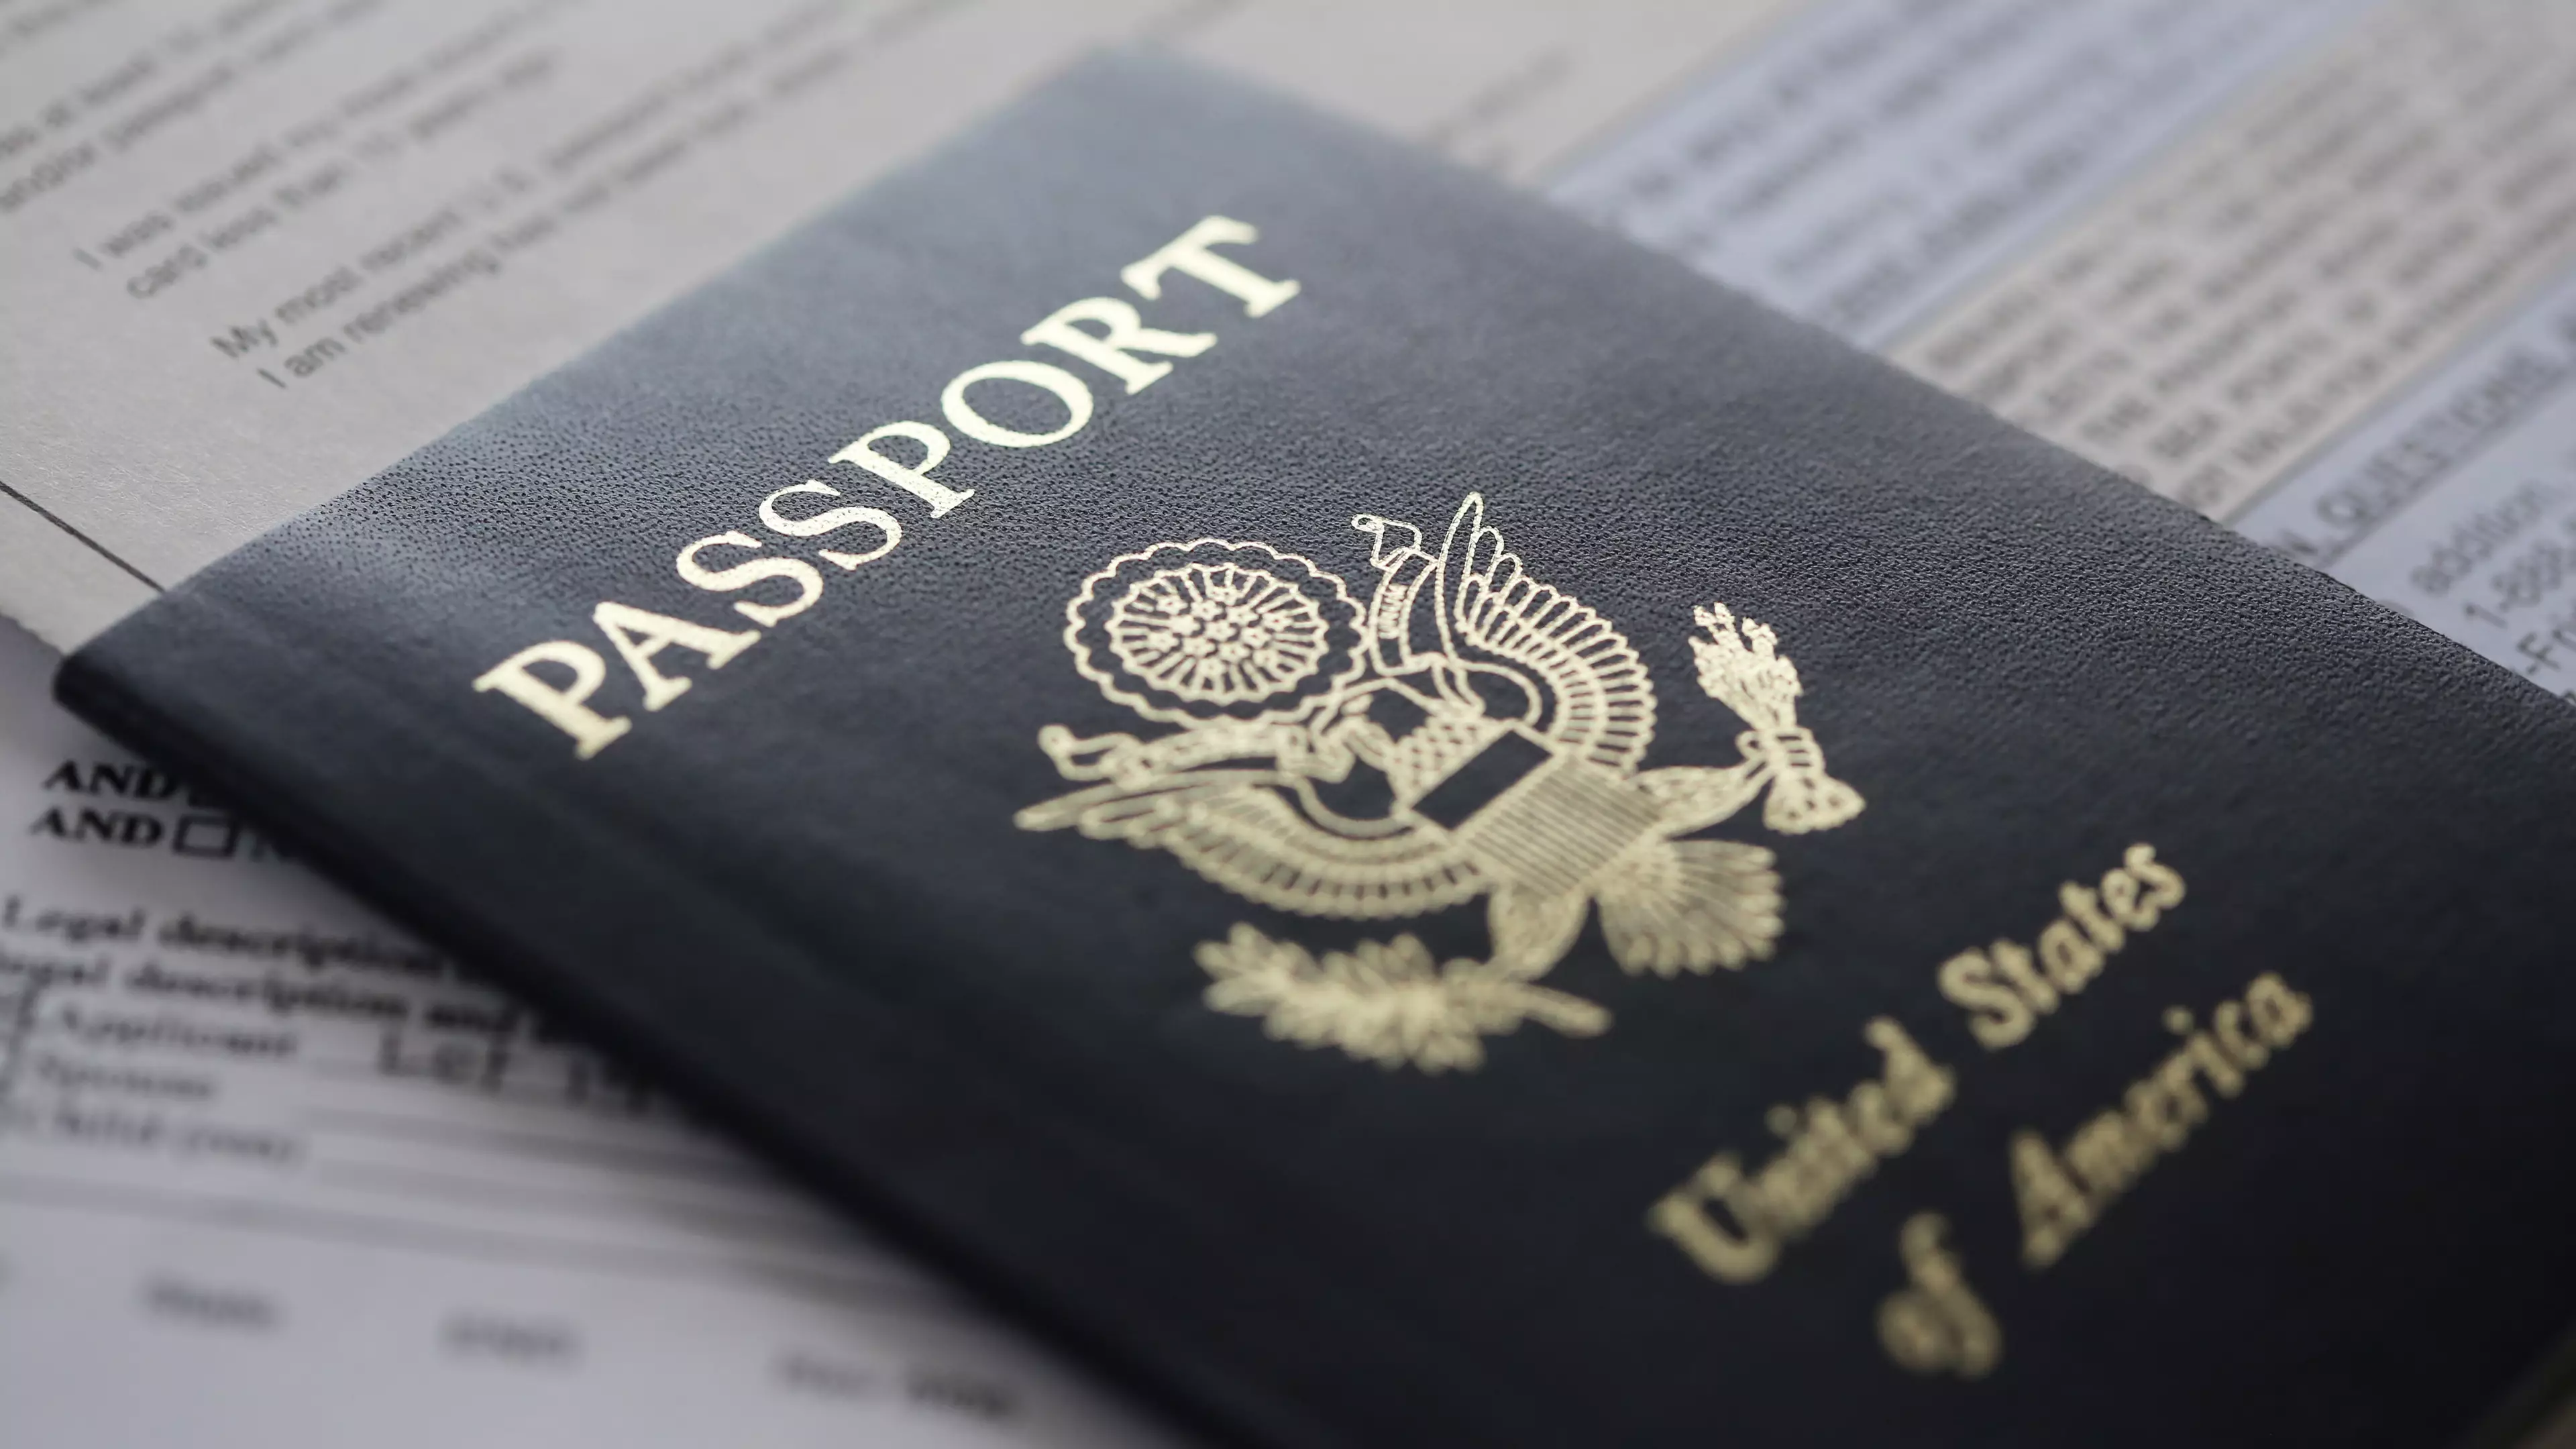 United States Issues First Ever Passport With X Gender Designation